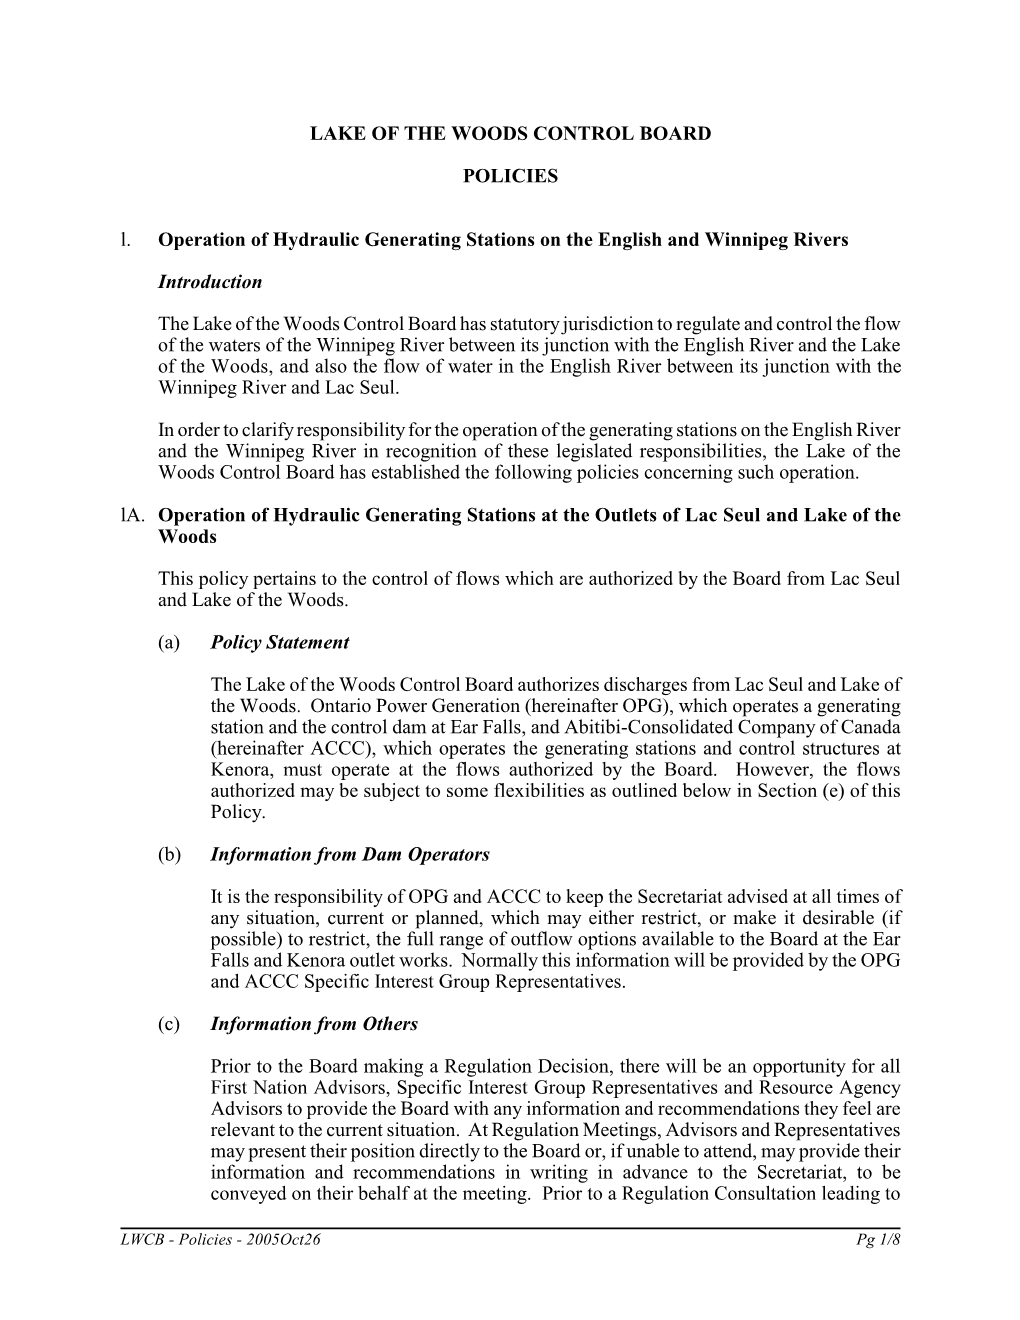 LAKE of the WOODS CONTROL BOARD POLICIES L. Operation of Hydraulic Generating Stations on the English and Winnipeg Rivers Introd